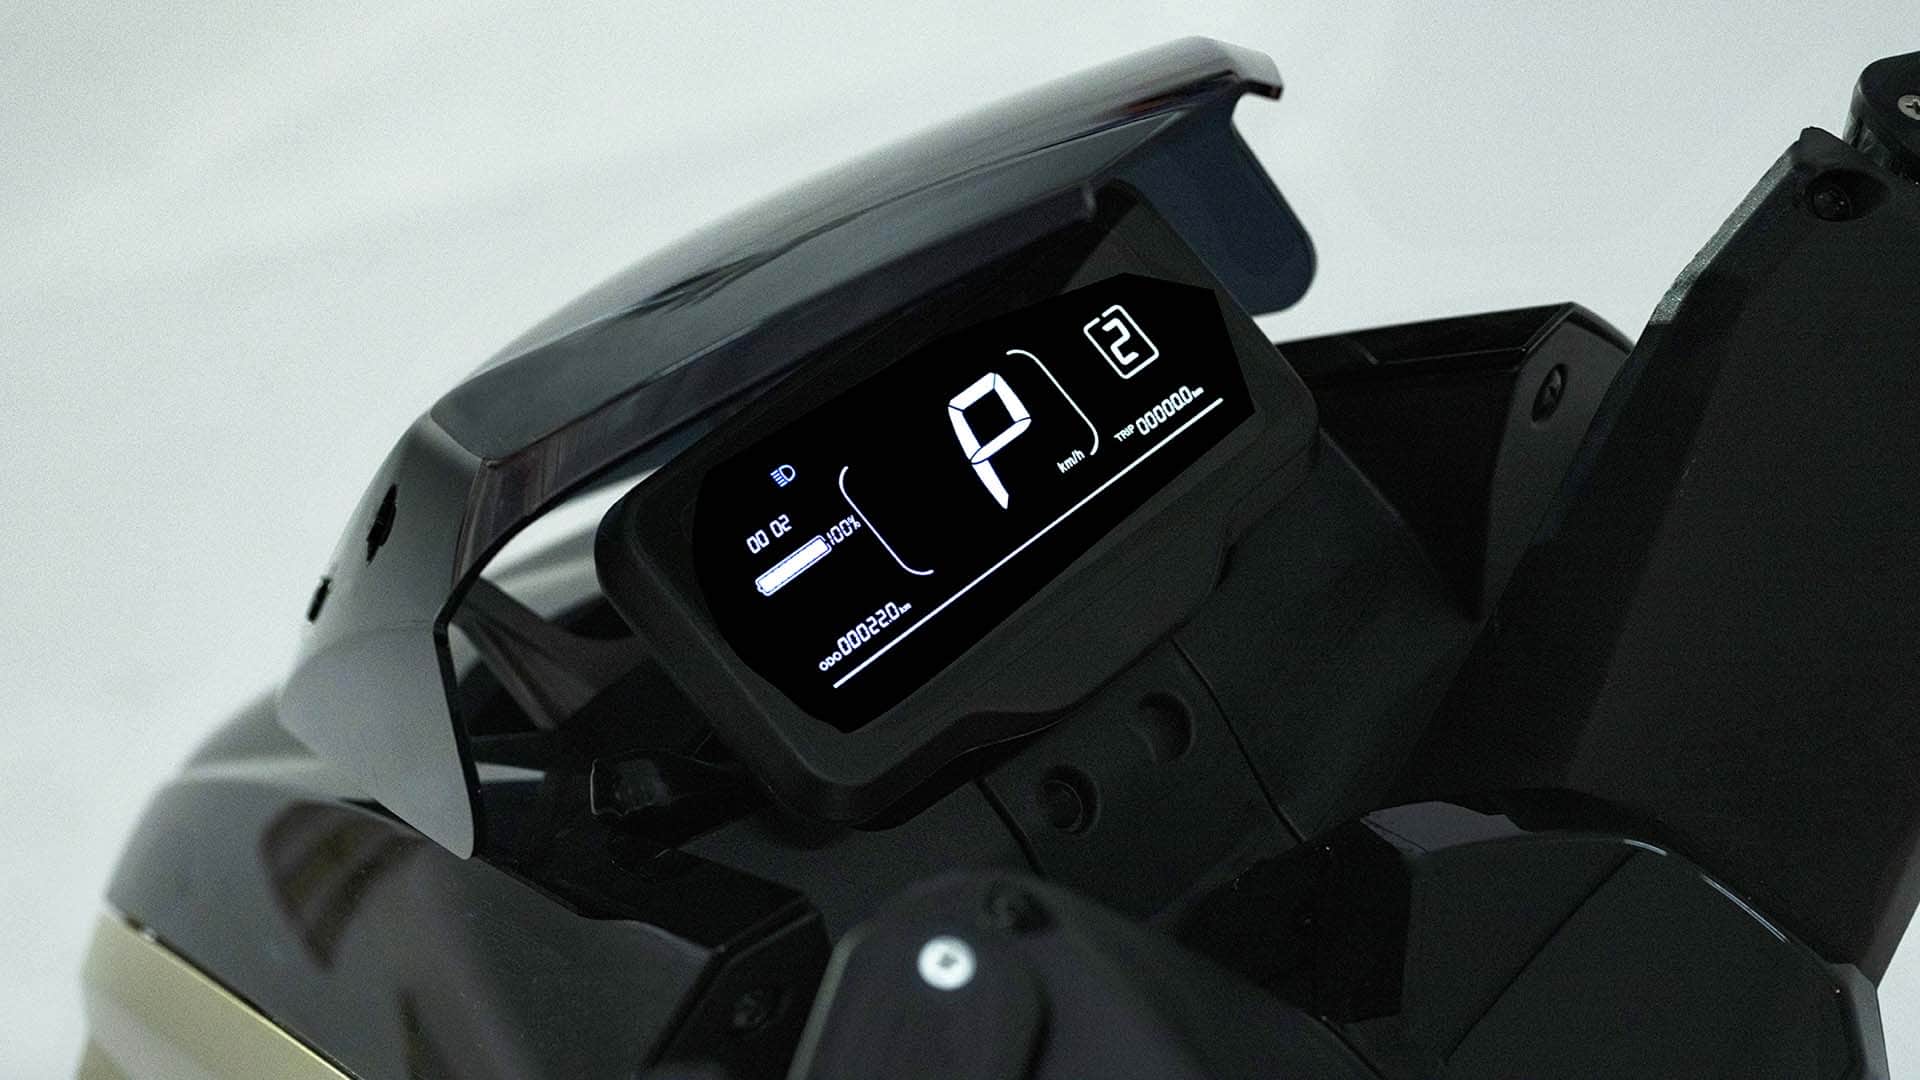 SK3 electric road legal scooter dashboard illuminated